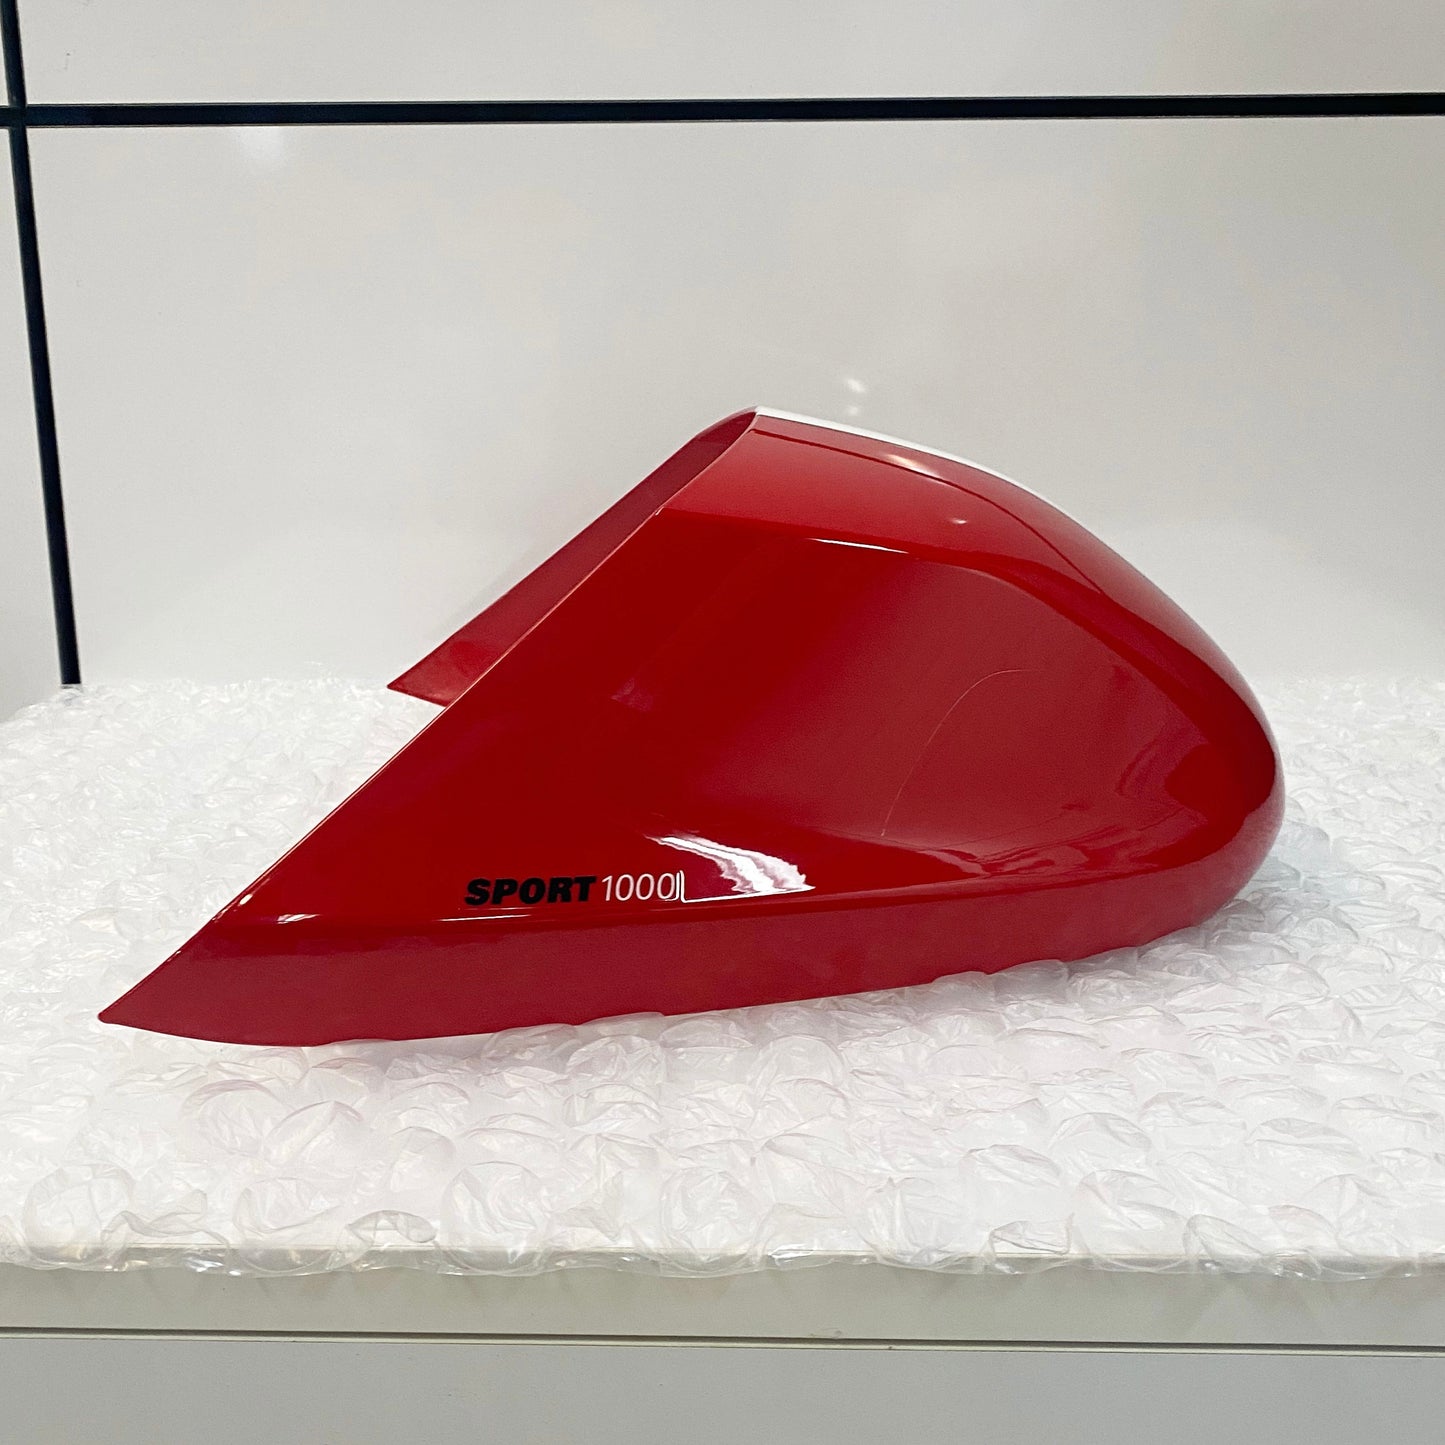 Ducati Sport 1000 Box Seat Tail, Red - 48310501CM Used